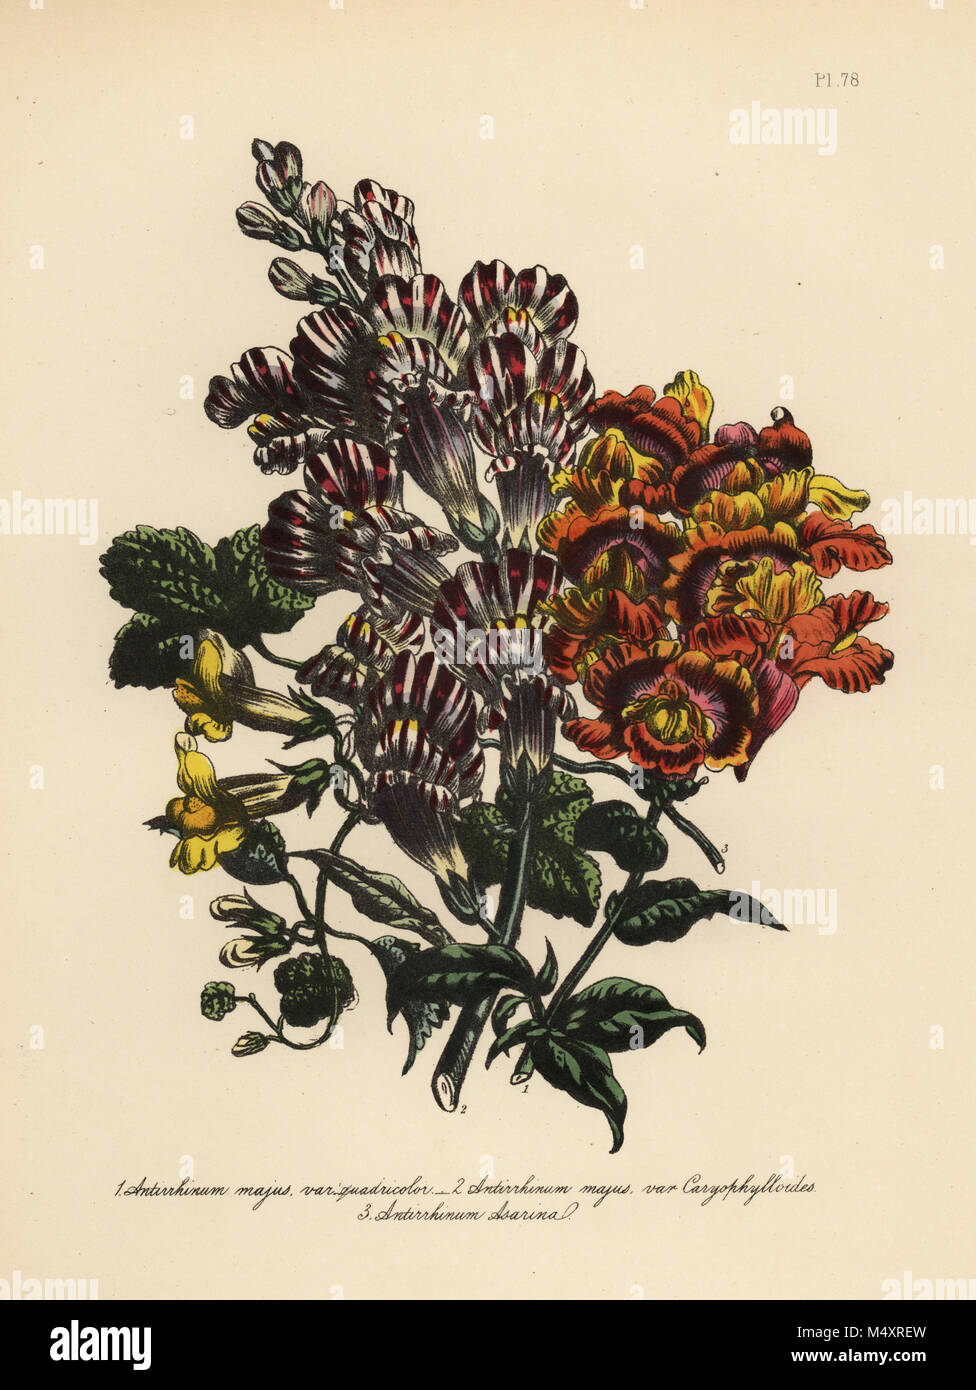 Four-coloured snapdragon, Antirrhinum majus quadricolor, carnation-flowered snapdragon, A. majus caryophylloides, and heart-shaped snapdragon, A. asarina. Handfinished chromolithograph by Henry Noel Humphreys after an illustration by Jane Loudon from Mrs. Jane Loudon's Ladies Flower Garden of Ornamental Perennials, William S. Orr, London, 1849. Stock Photo